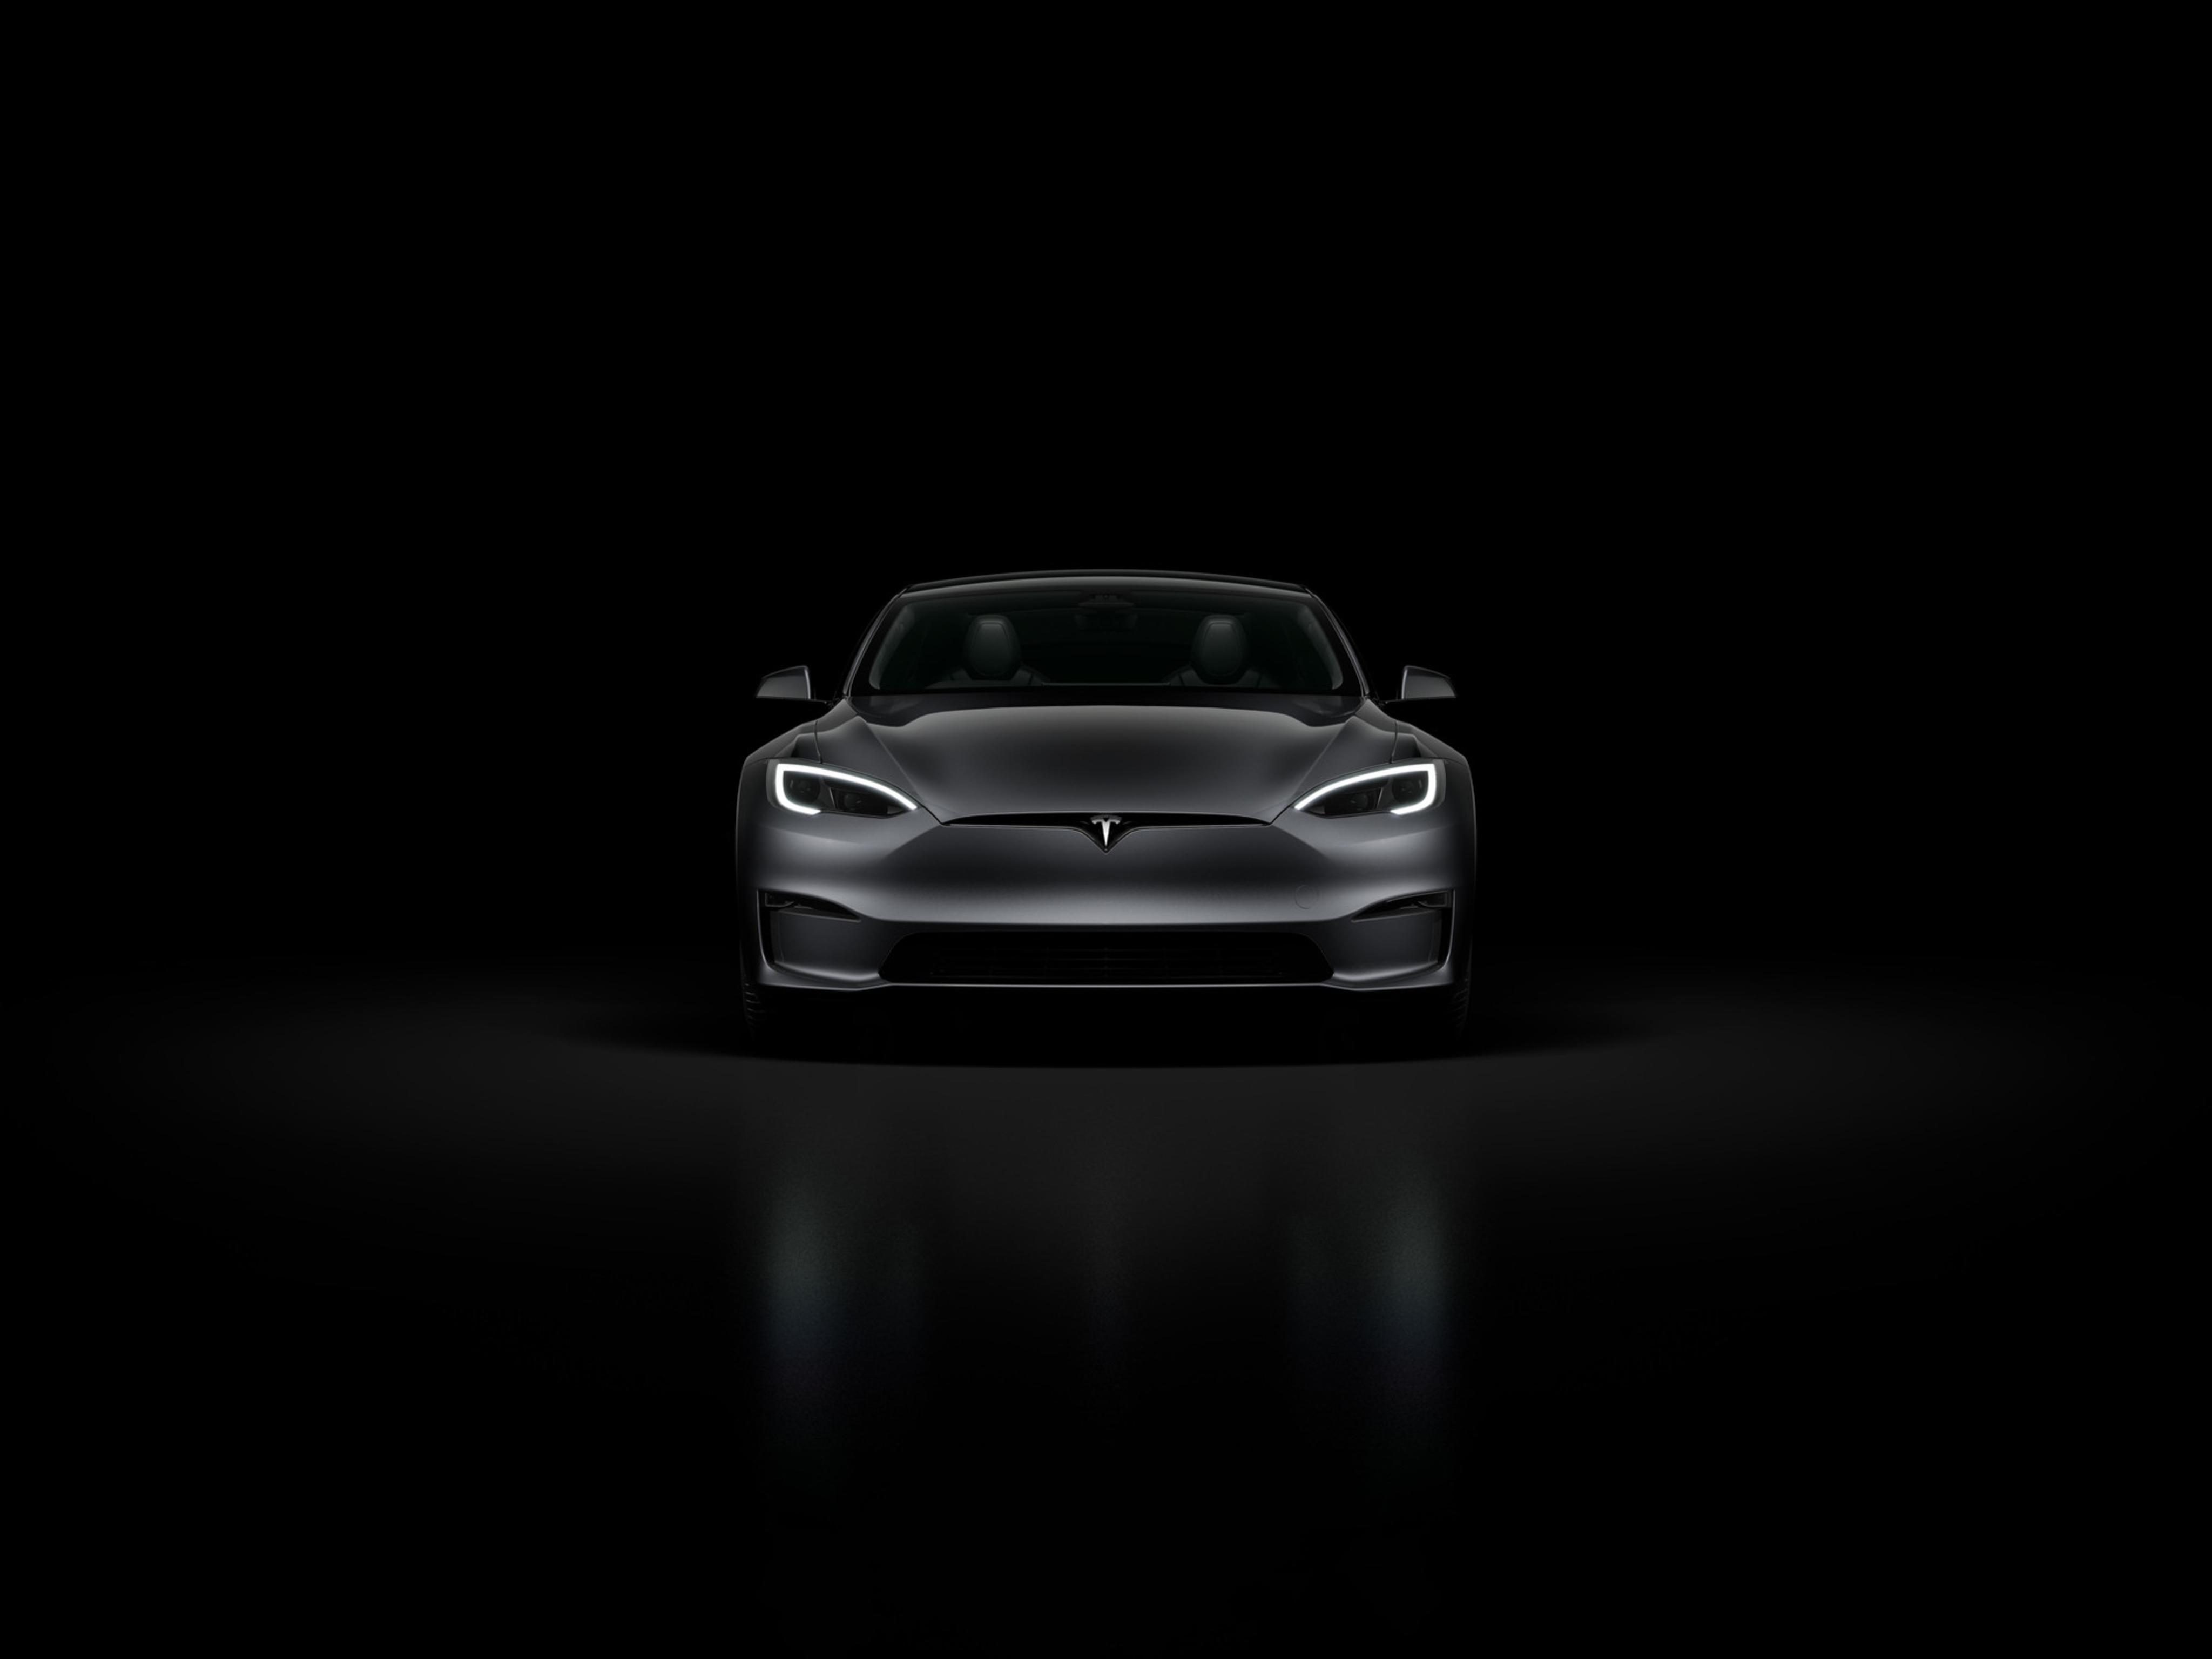 Front view of black Model S